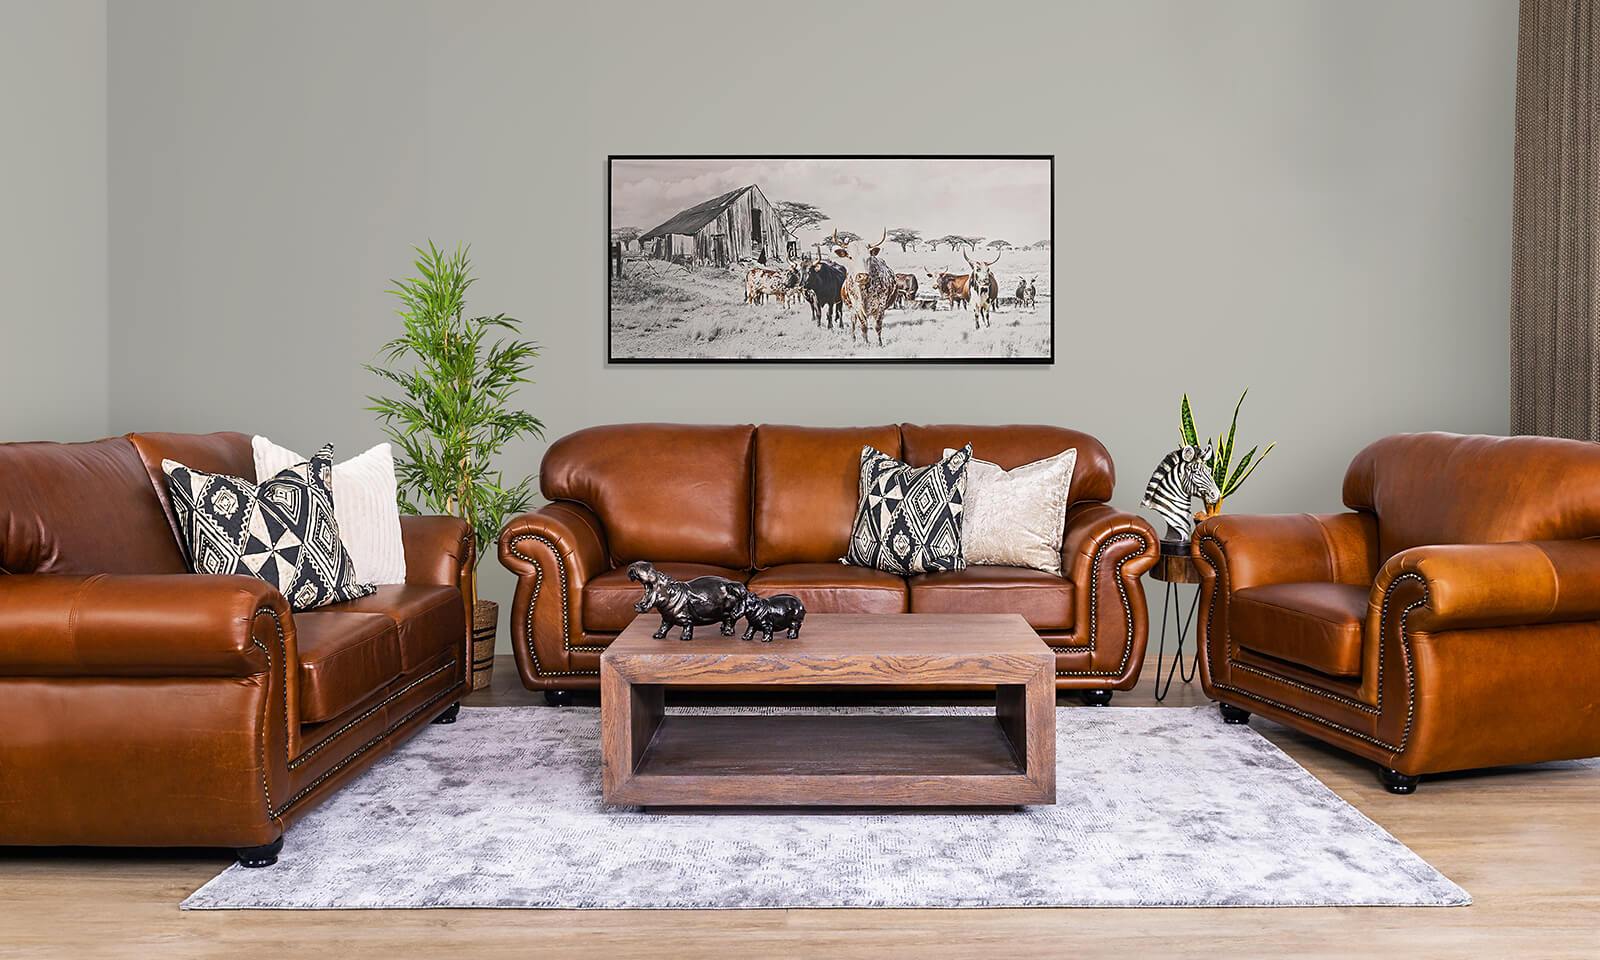 WHY OUR ISILO LEATHER SOFA SUITE IS SO WELL LOVED